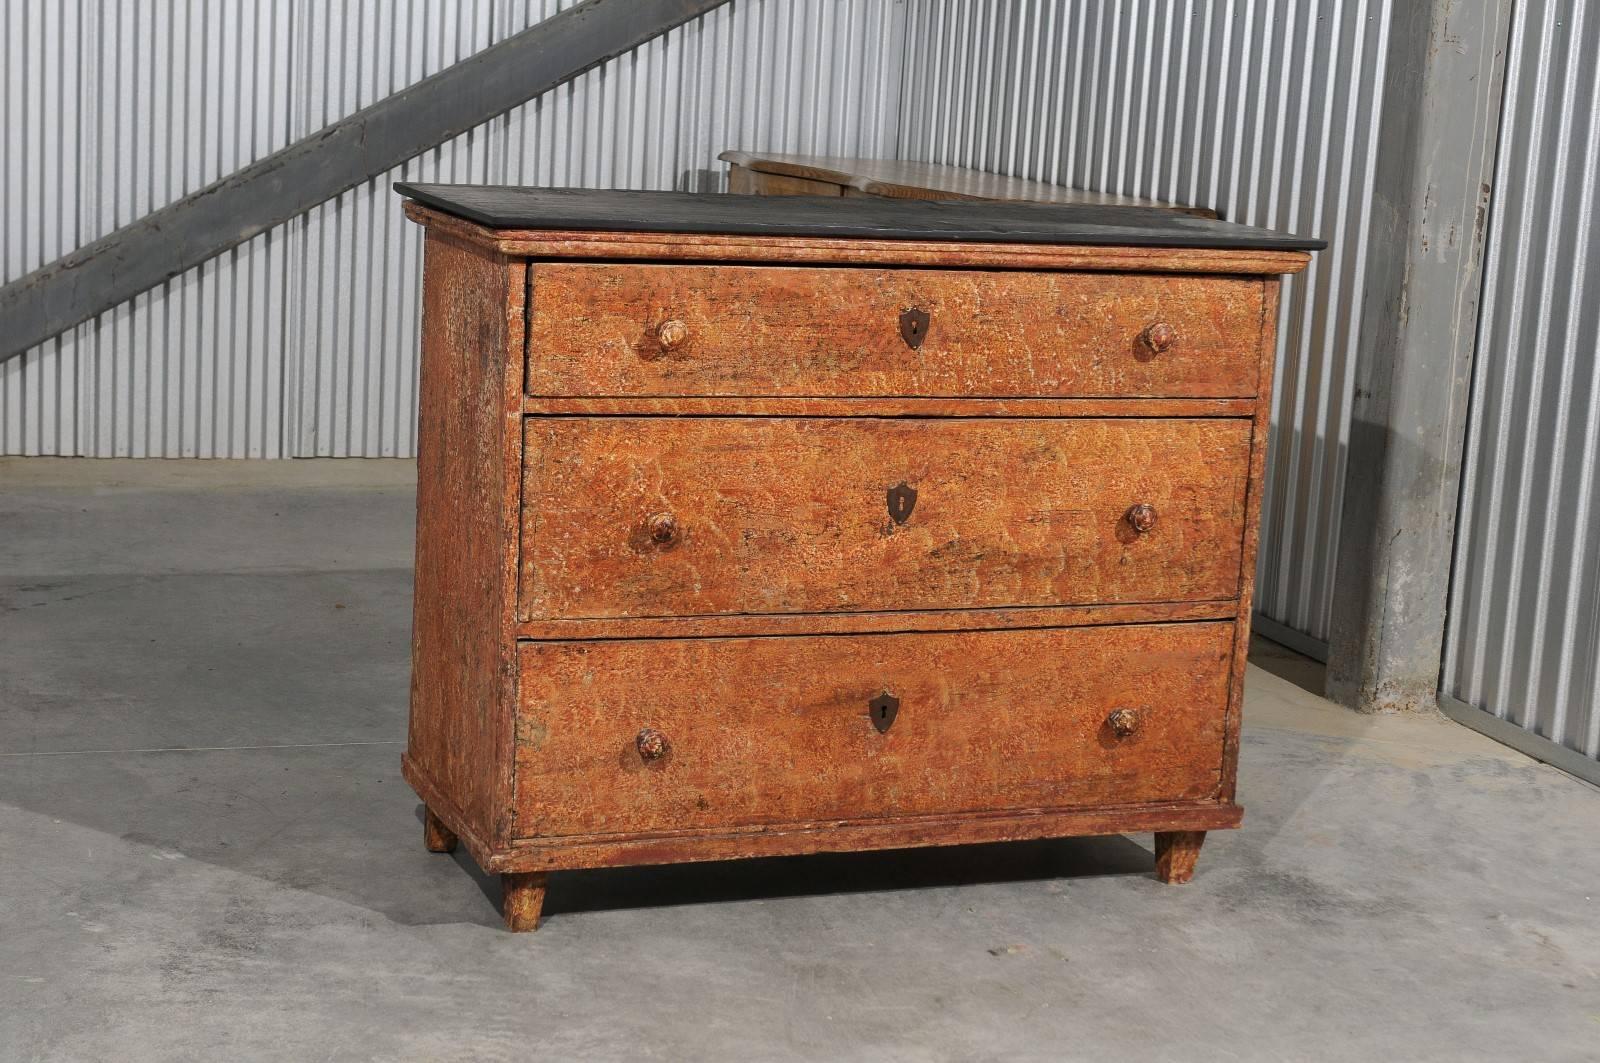 A French painted wood three-drawer commode from the early 19th century with black slate top. This French commode features a rectangular black slate top (not original to the piece), over three dovetailed drawers. Each drawer is adorned with two